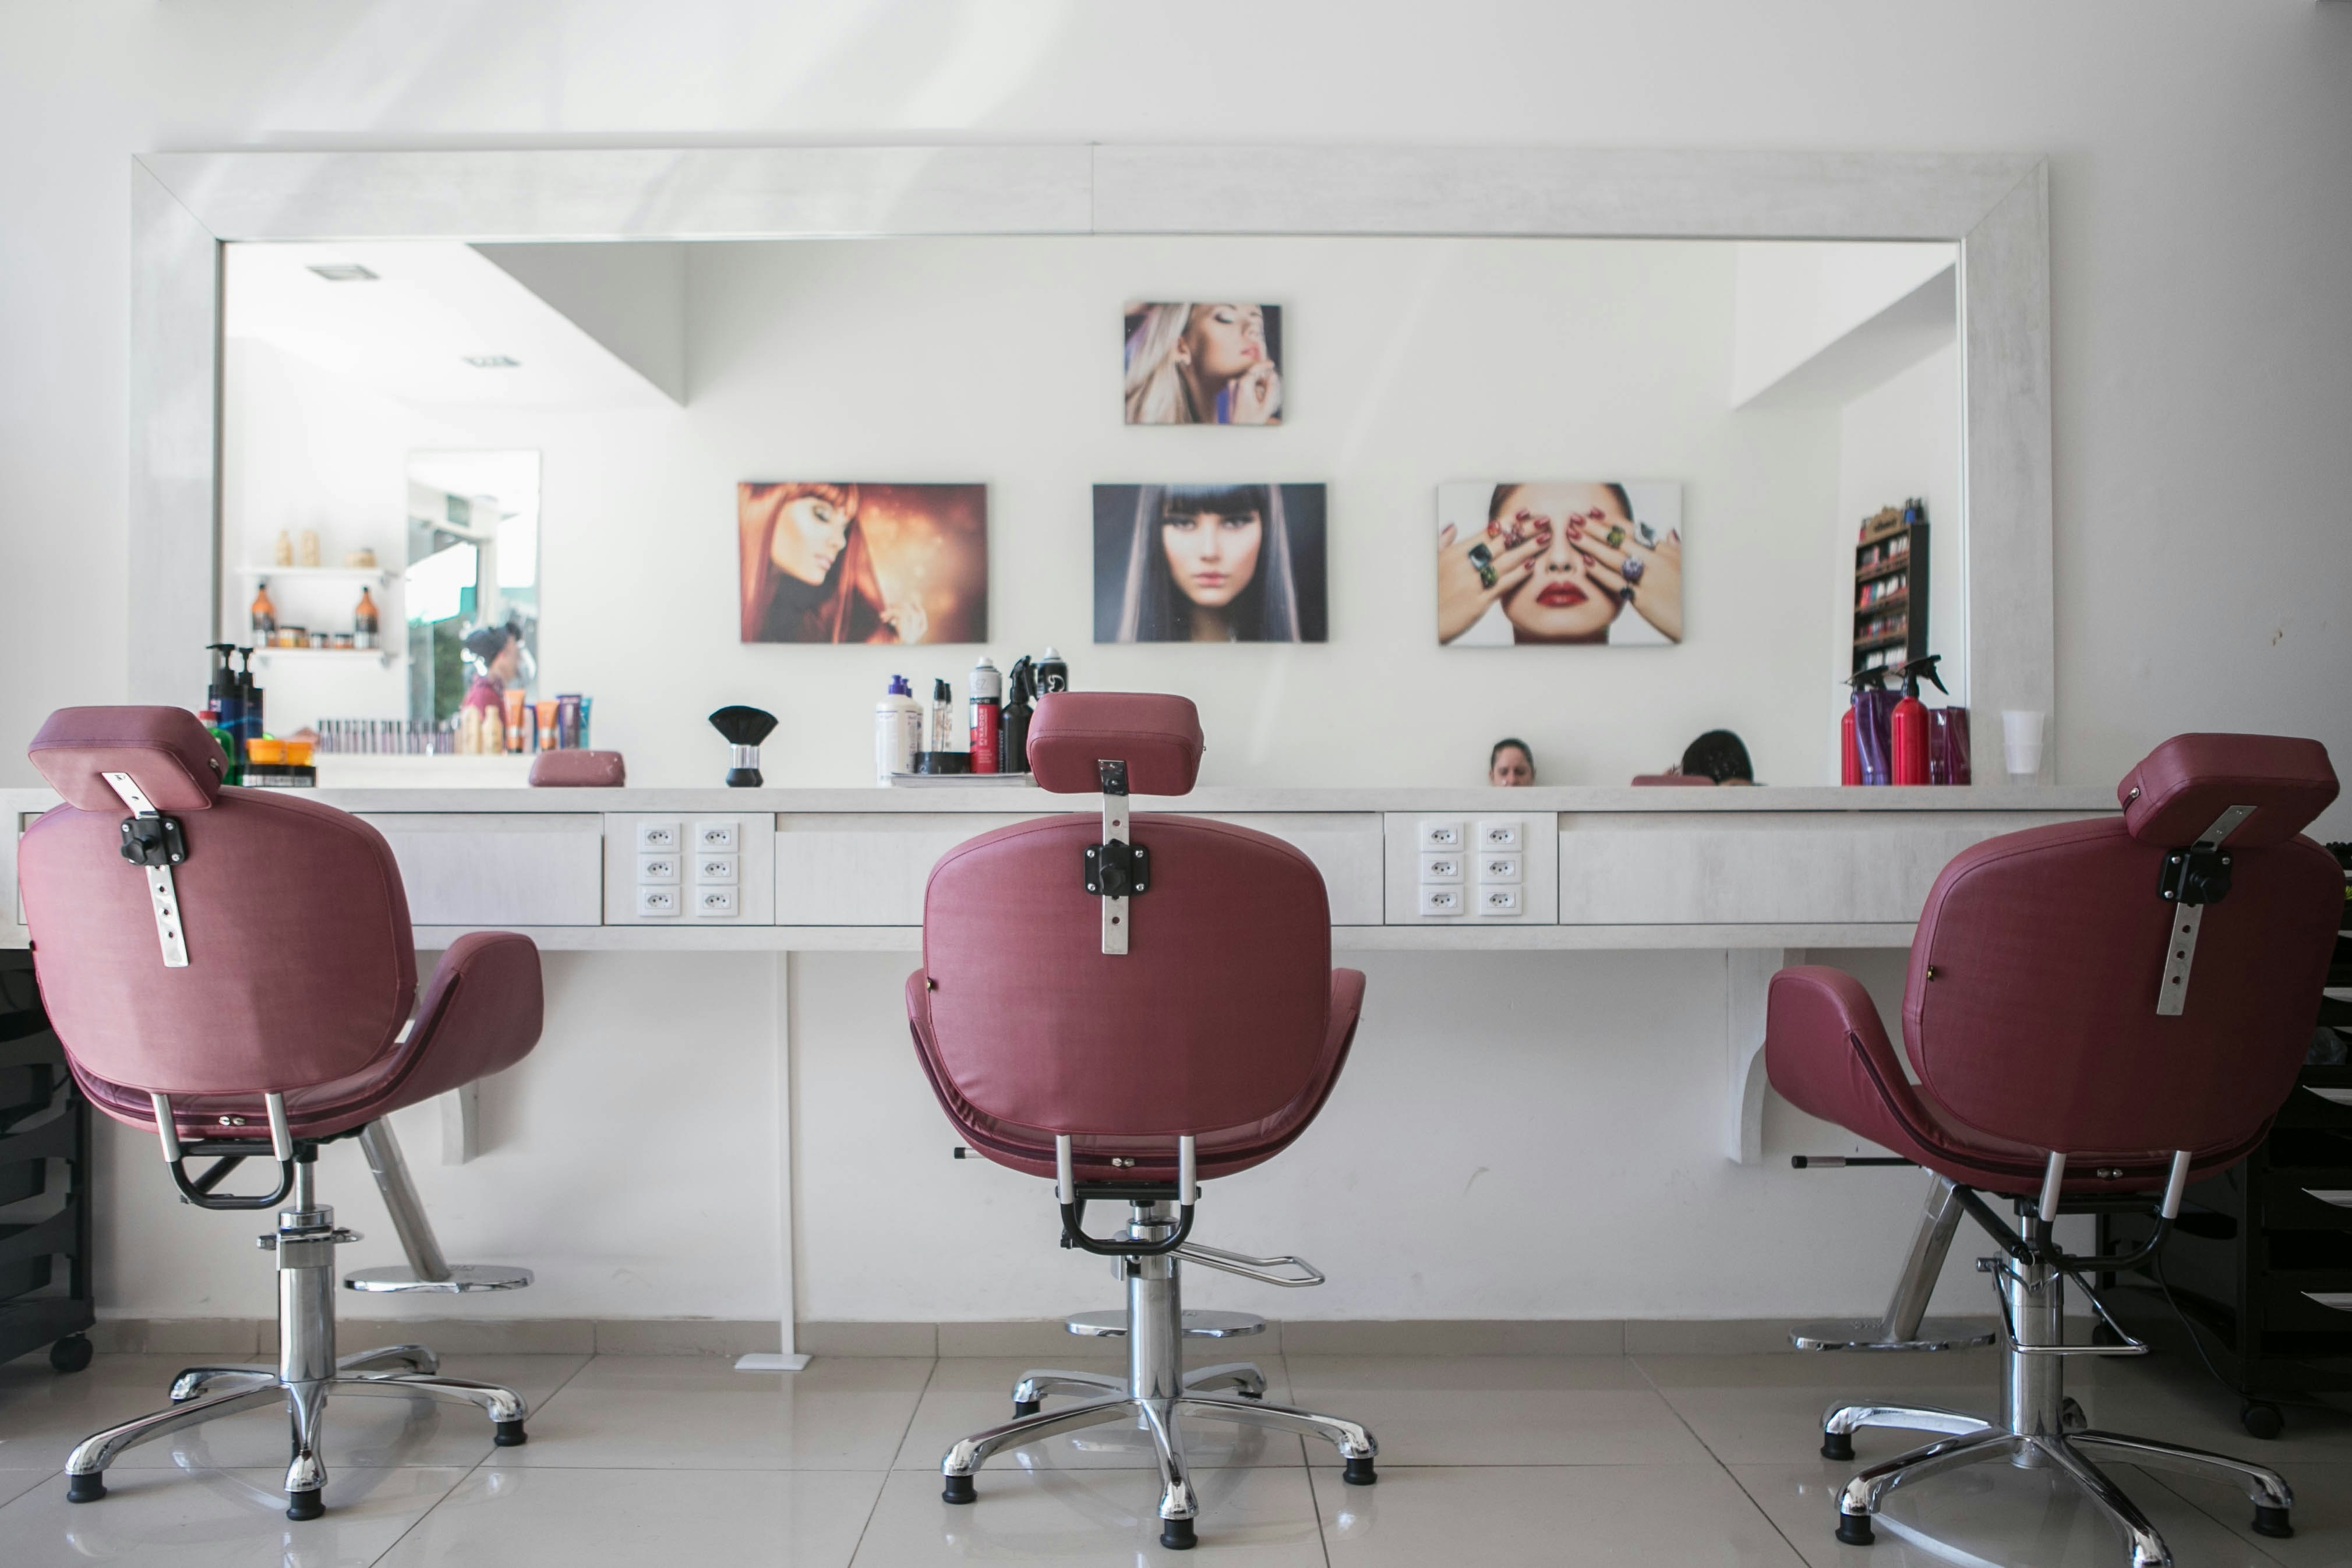 Where to find an English-speaking hairdresser in Barcelona | TEFL Iberia